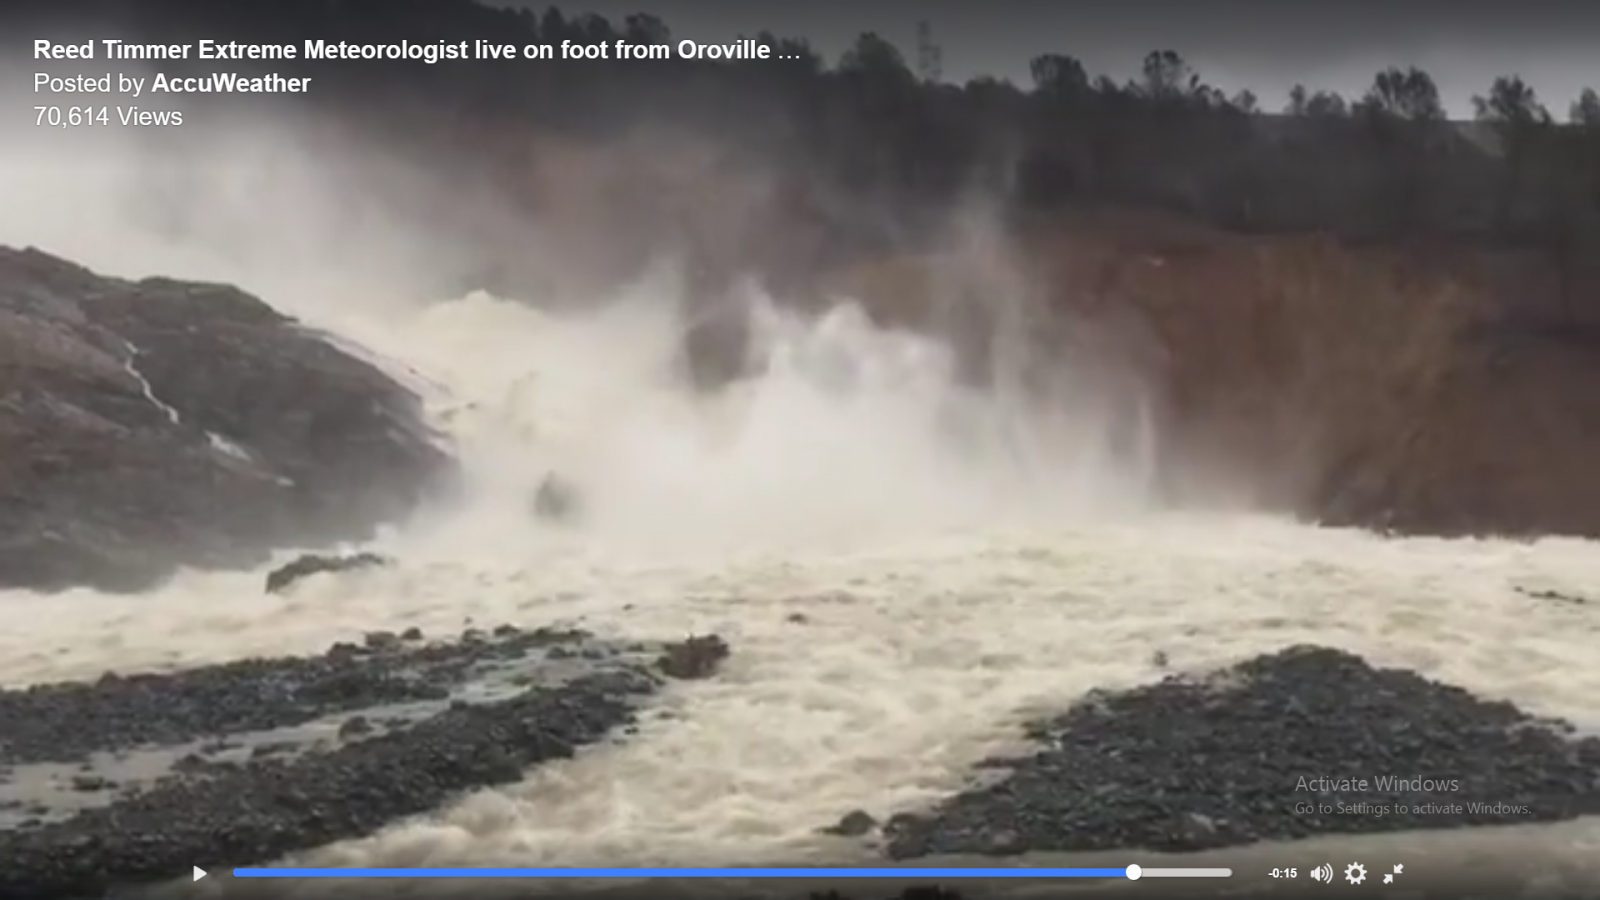 oroville dam - Facebook Search - Google Chrome 2017-02-20 1_55_57 PM.png